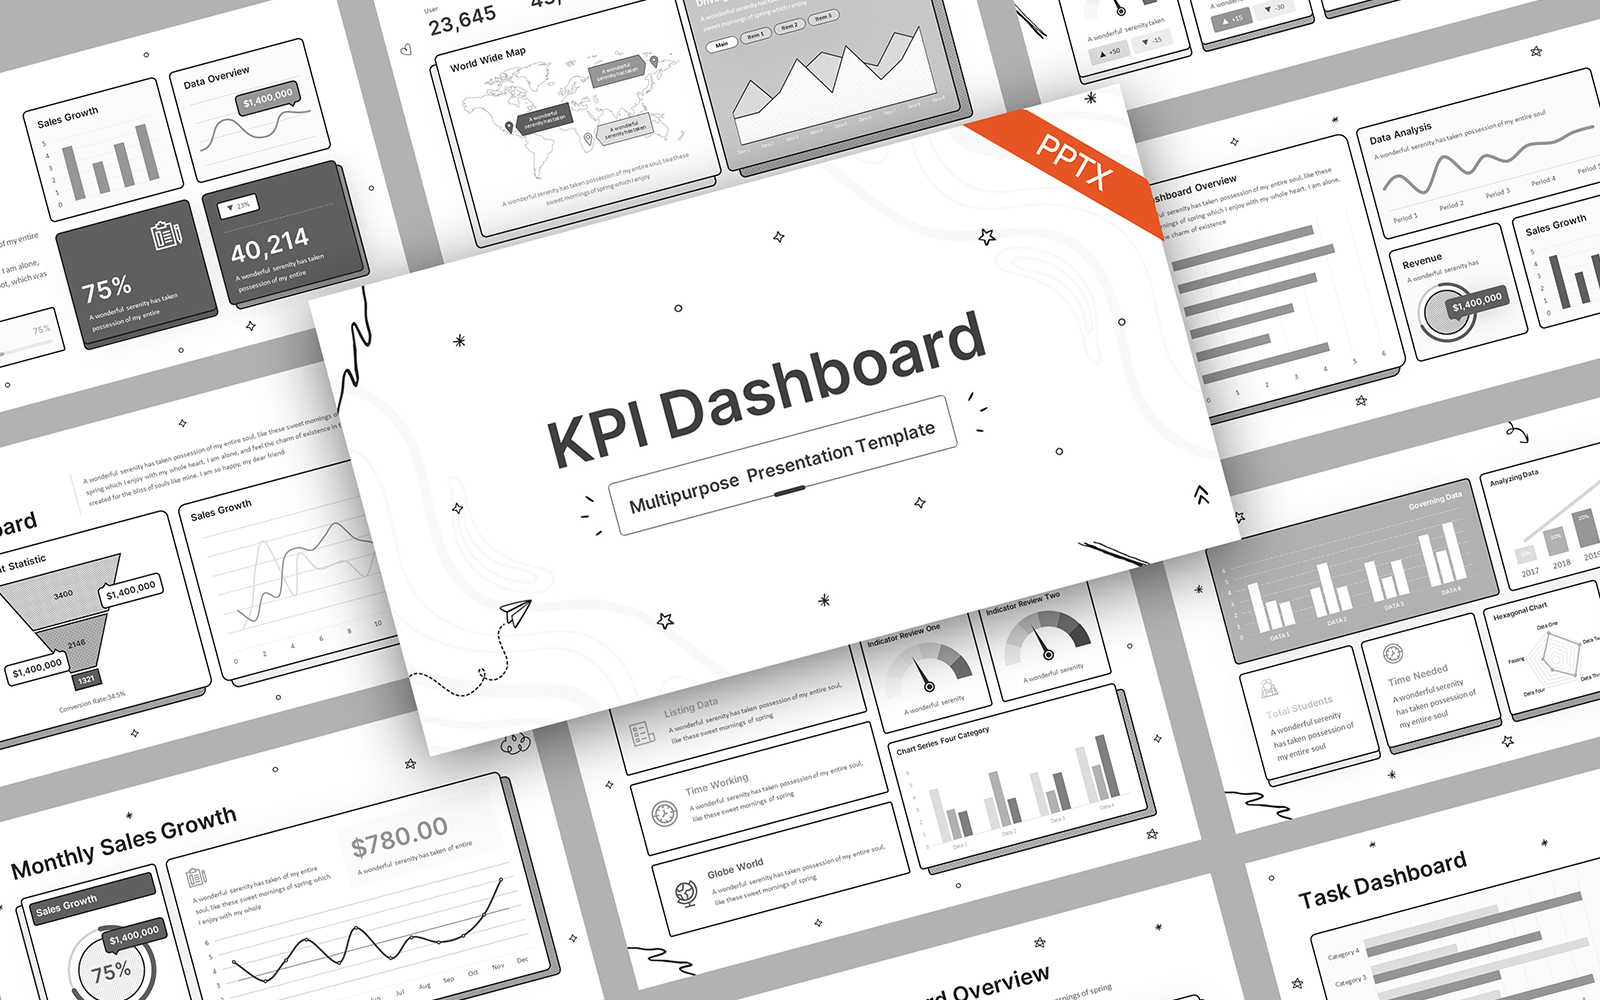 KPI Dashboard Doodle PowerPoint Template